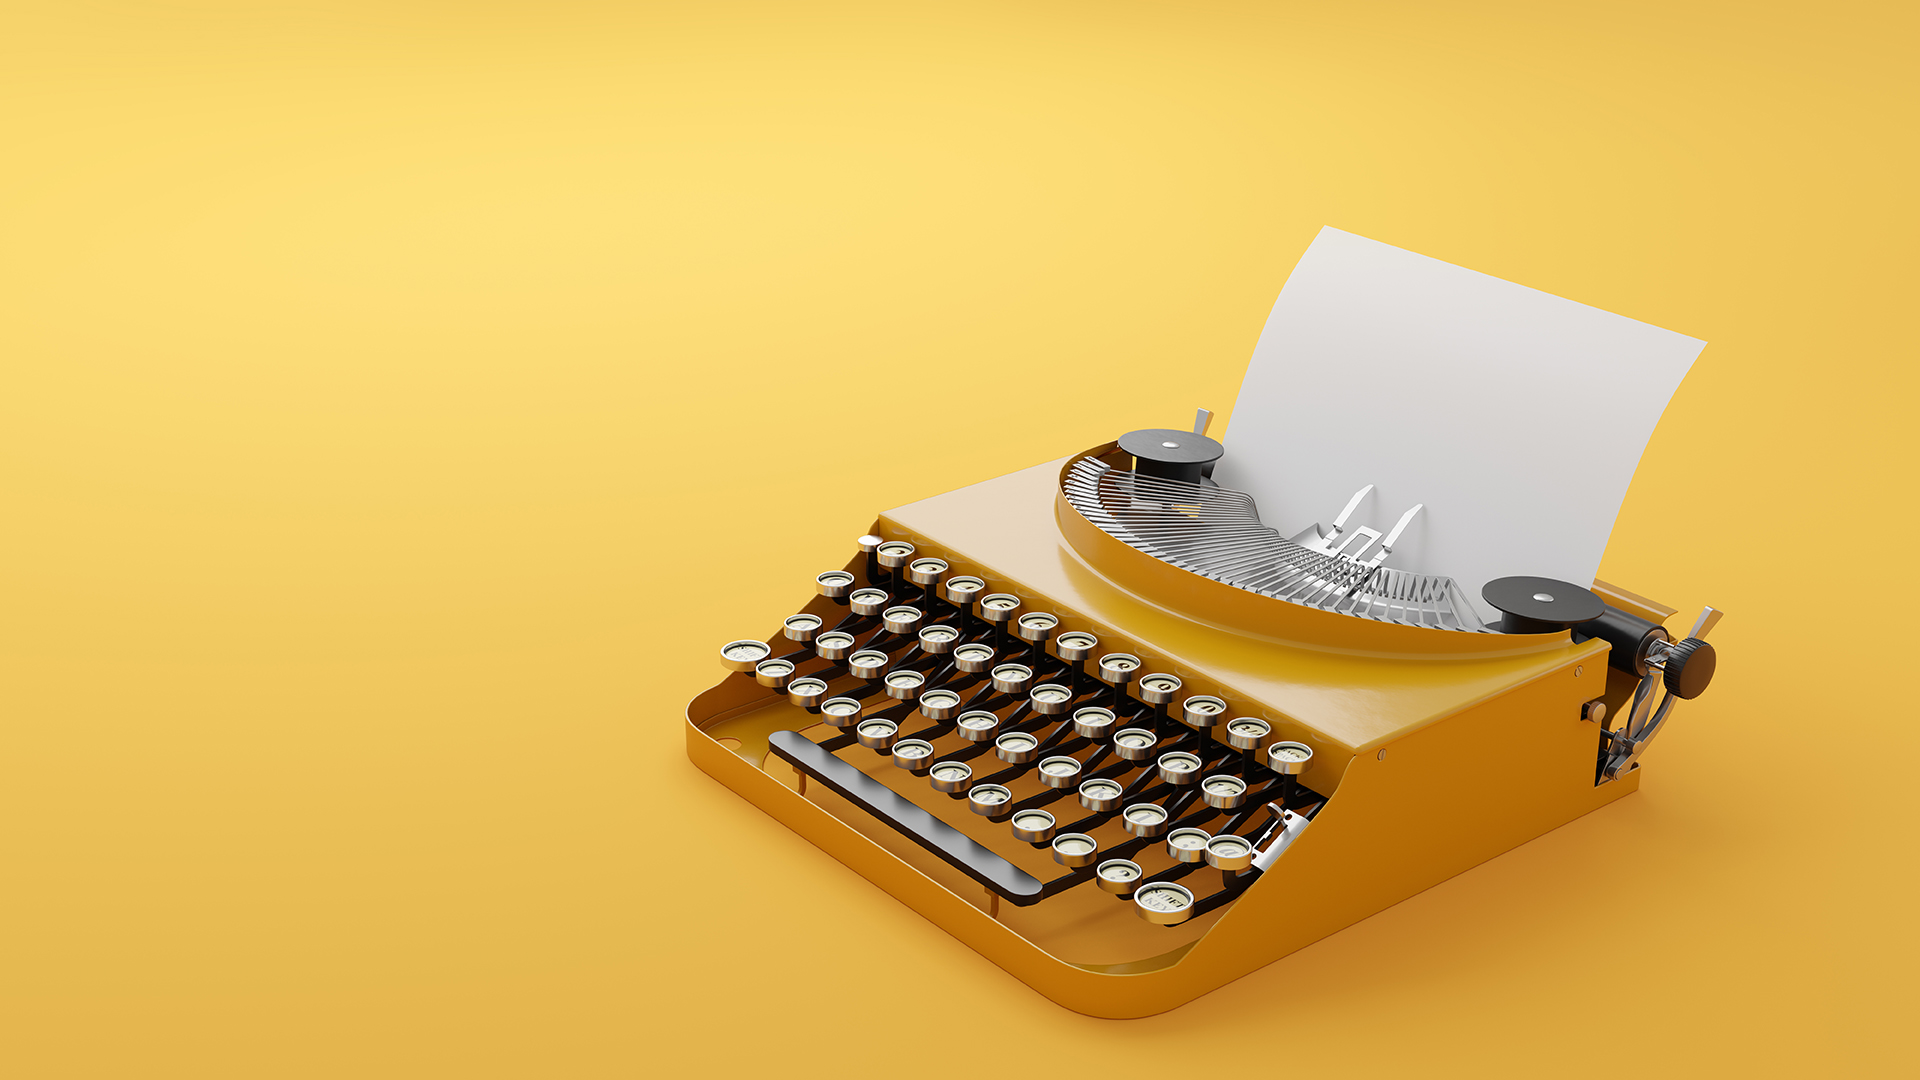 Retro vintage typewriter with blank piece of paper in single color modern style